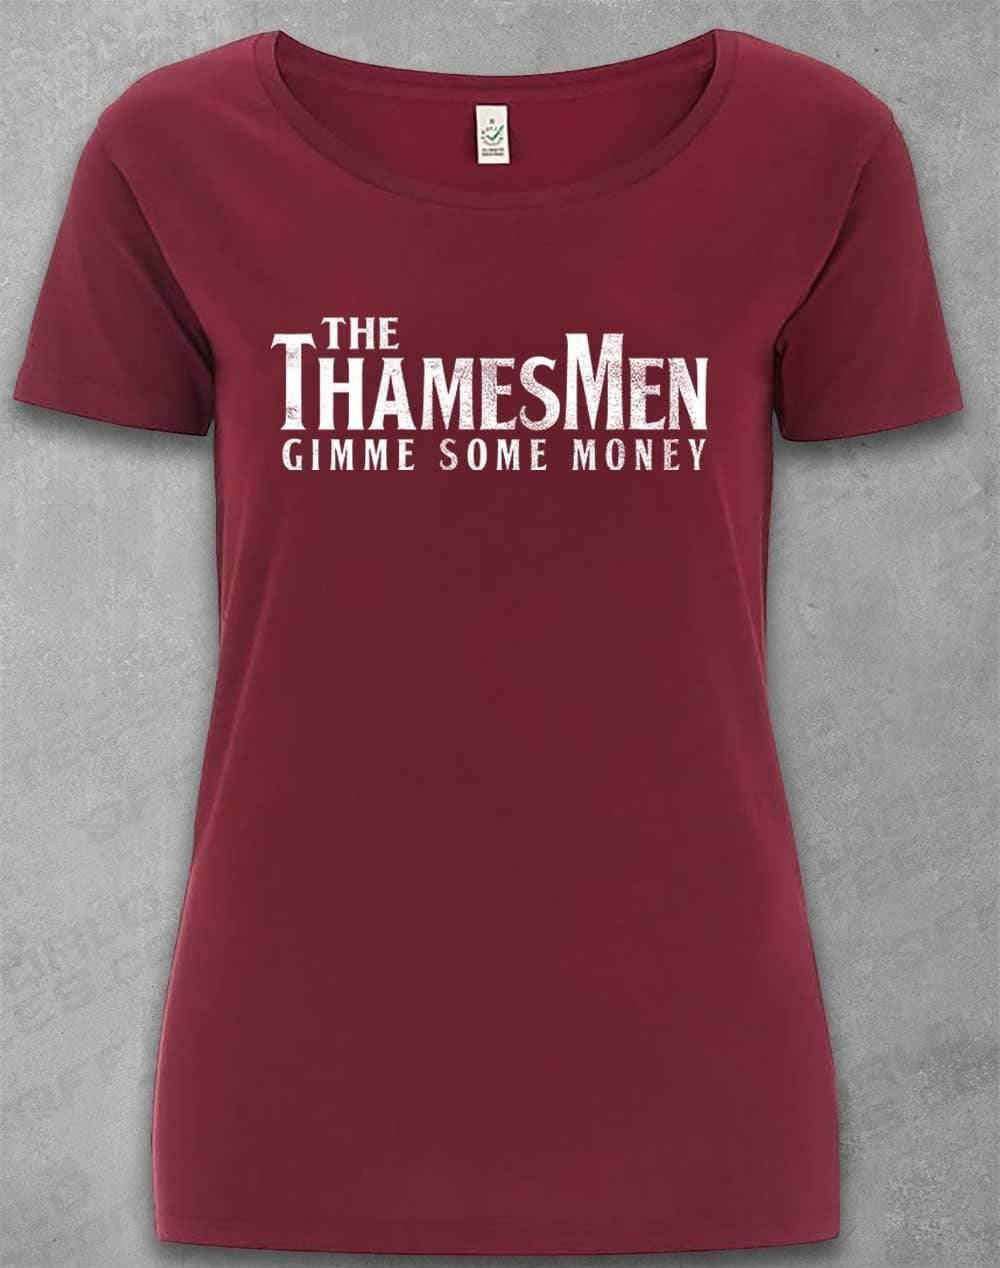 DELUXE The Thamesmen Gimme Some Money Organic Scoop Neck T-Shirt 8-10 / Burgundy  - Off World Tees